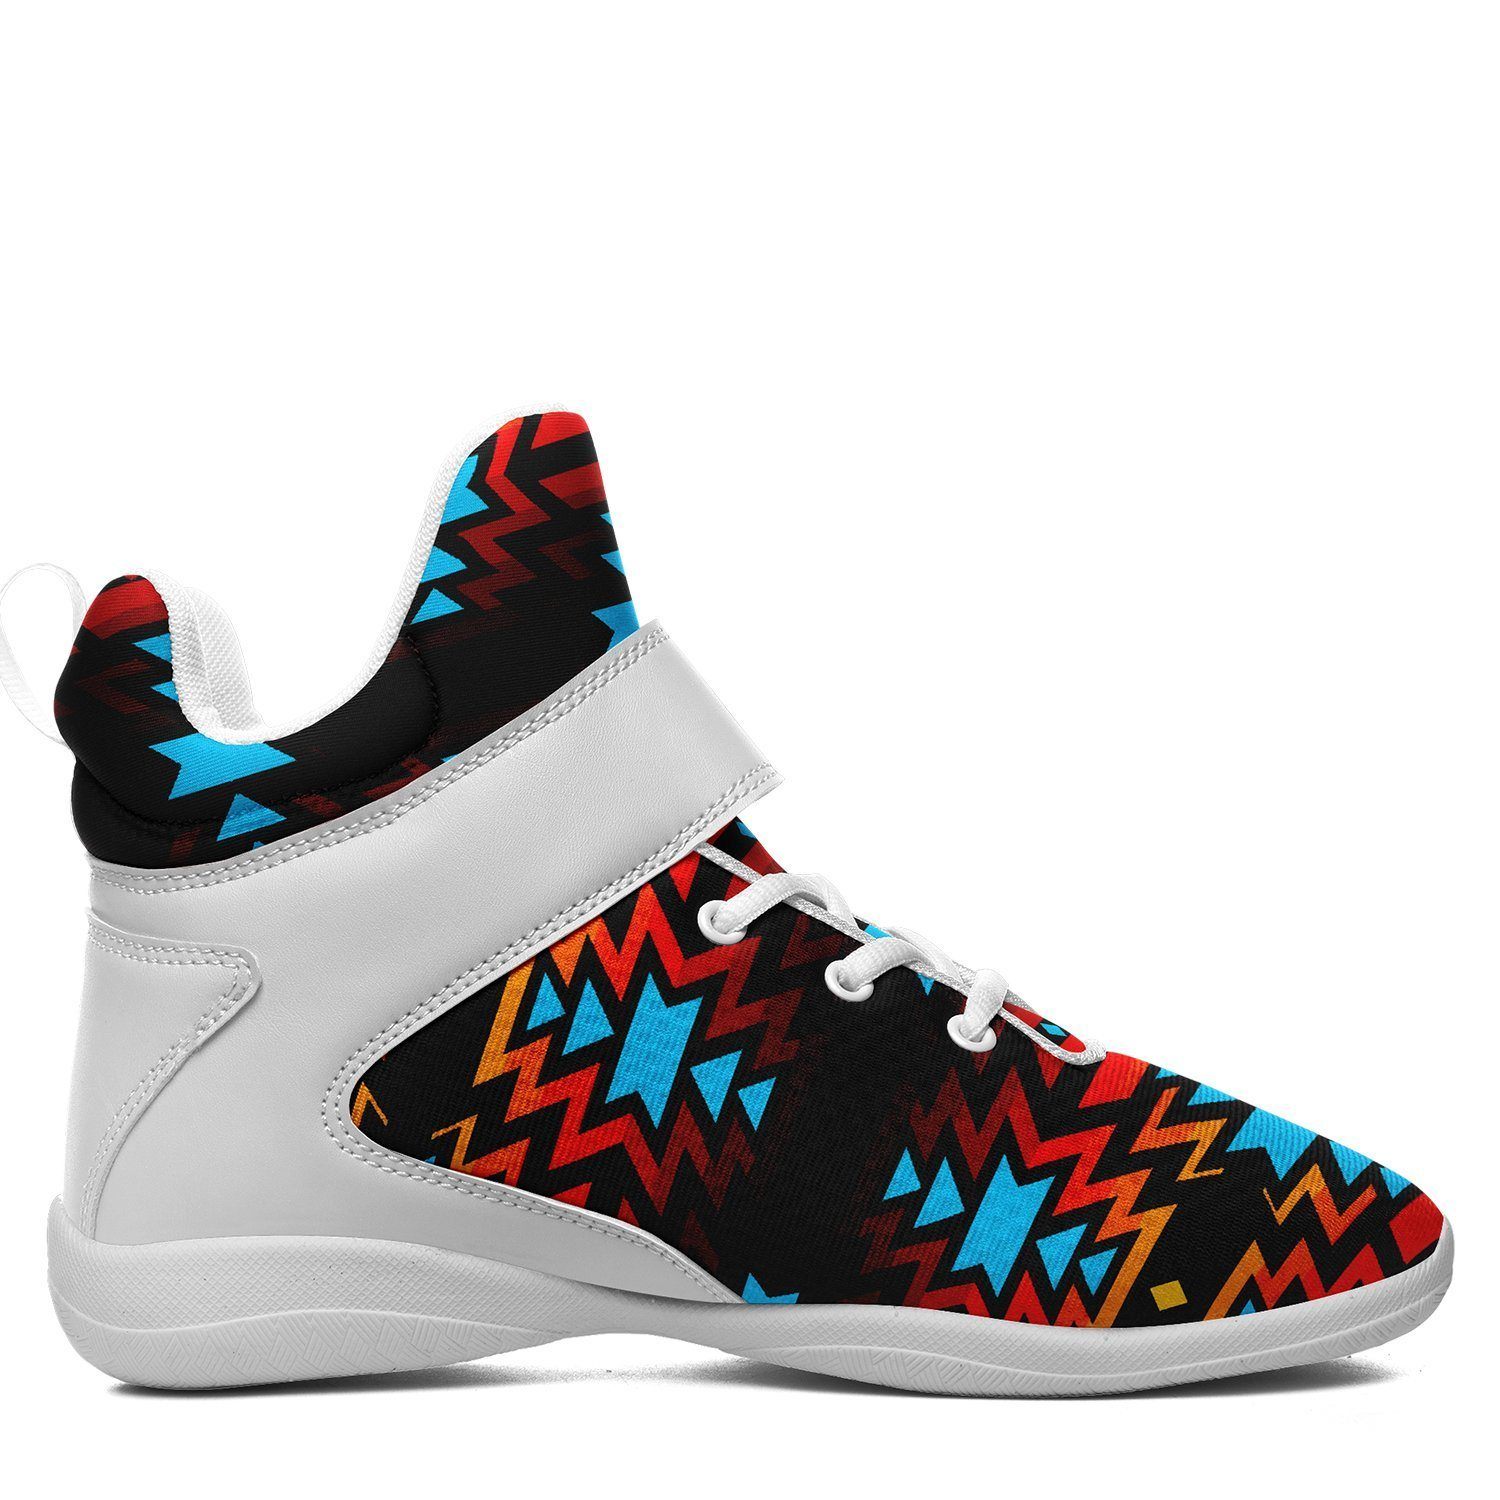 Black Fire and Turquoise Ipottaa Basketball / Sport High Top Shoes - White Sole 49 Dzine 